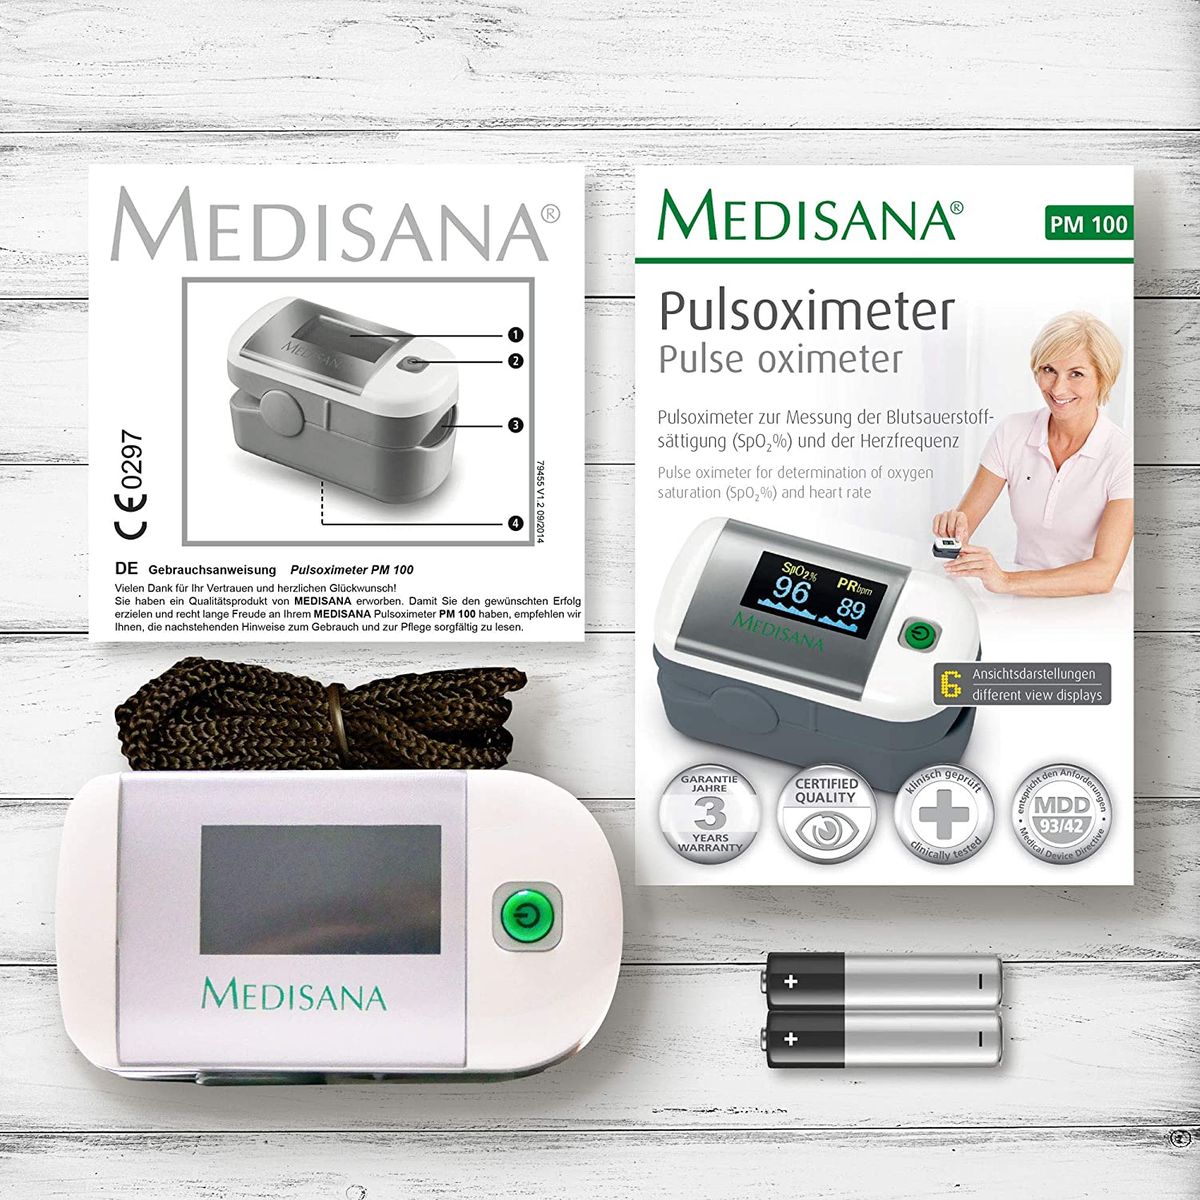 medisana PM 100 pulse oximeter, measurement of oxygen saturation in the blood, finger pulse oximeter with OLED display and one-touch operation white